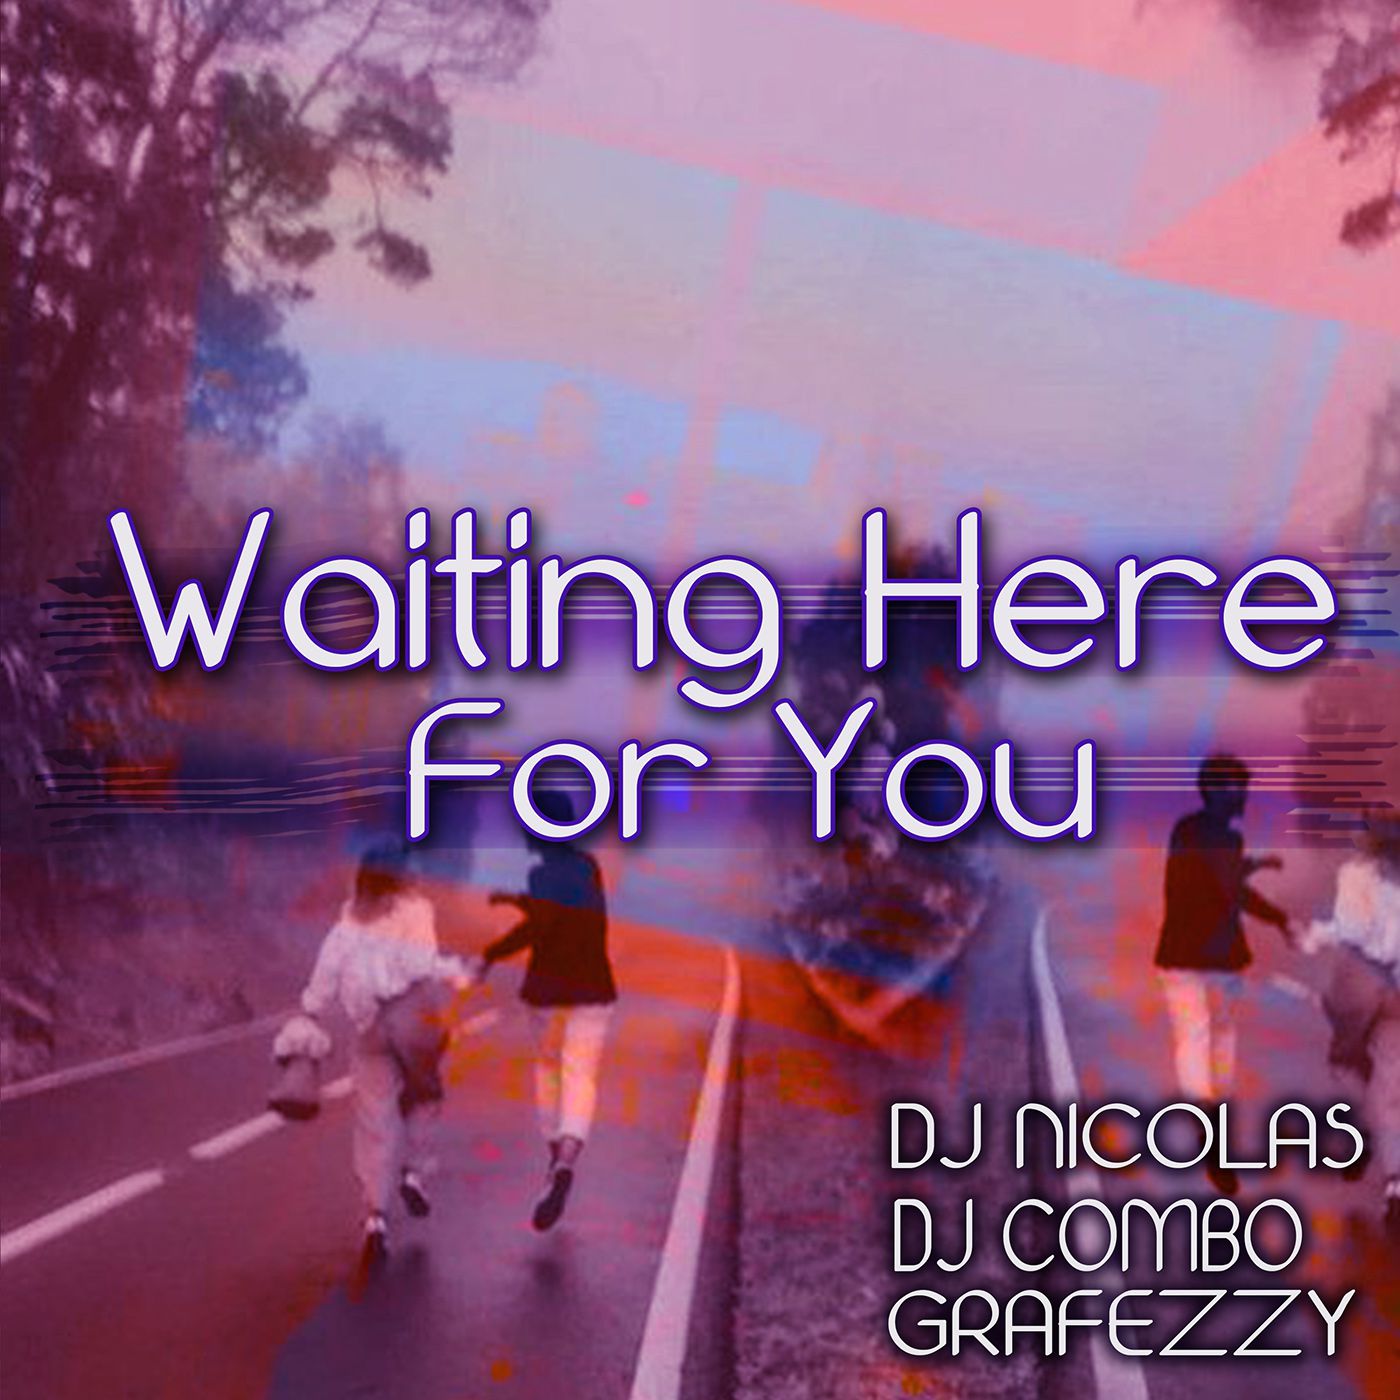 DJ Nicolas, DJ Combo, Grafezzy „Waiting Here For You“ – time to party